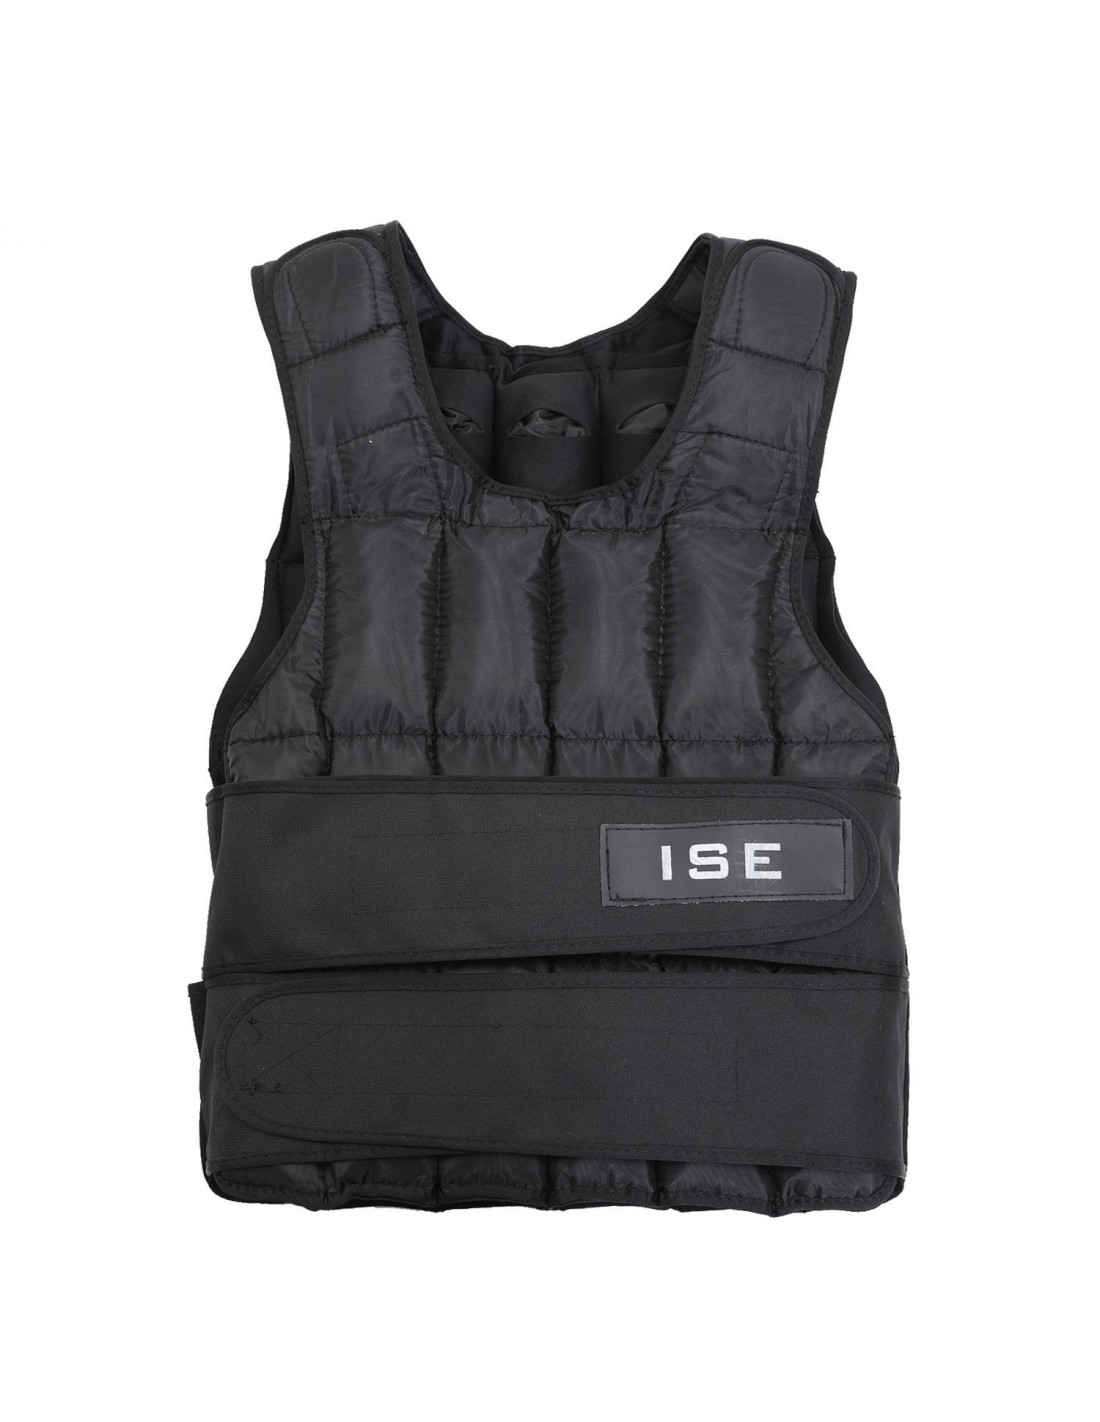 ASEWUN Adjustable Weighted Vest Max 44 lb Comfortable Body